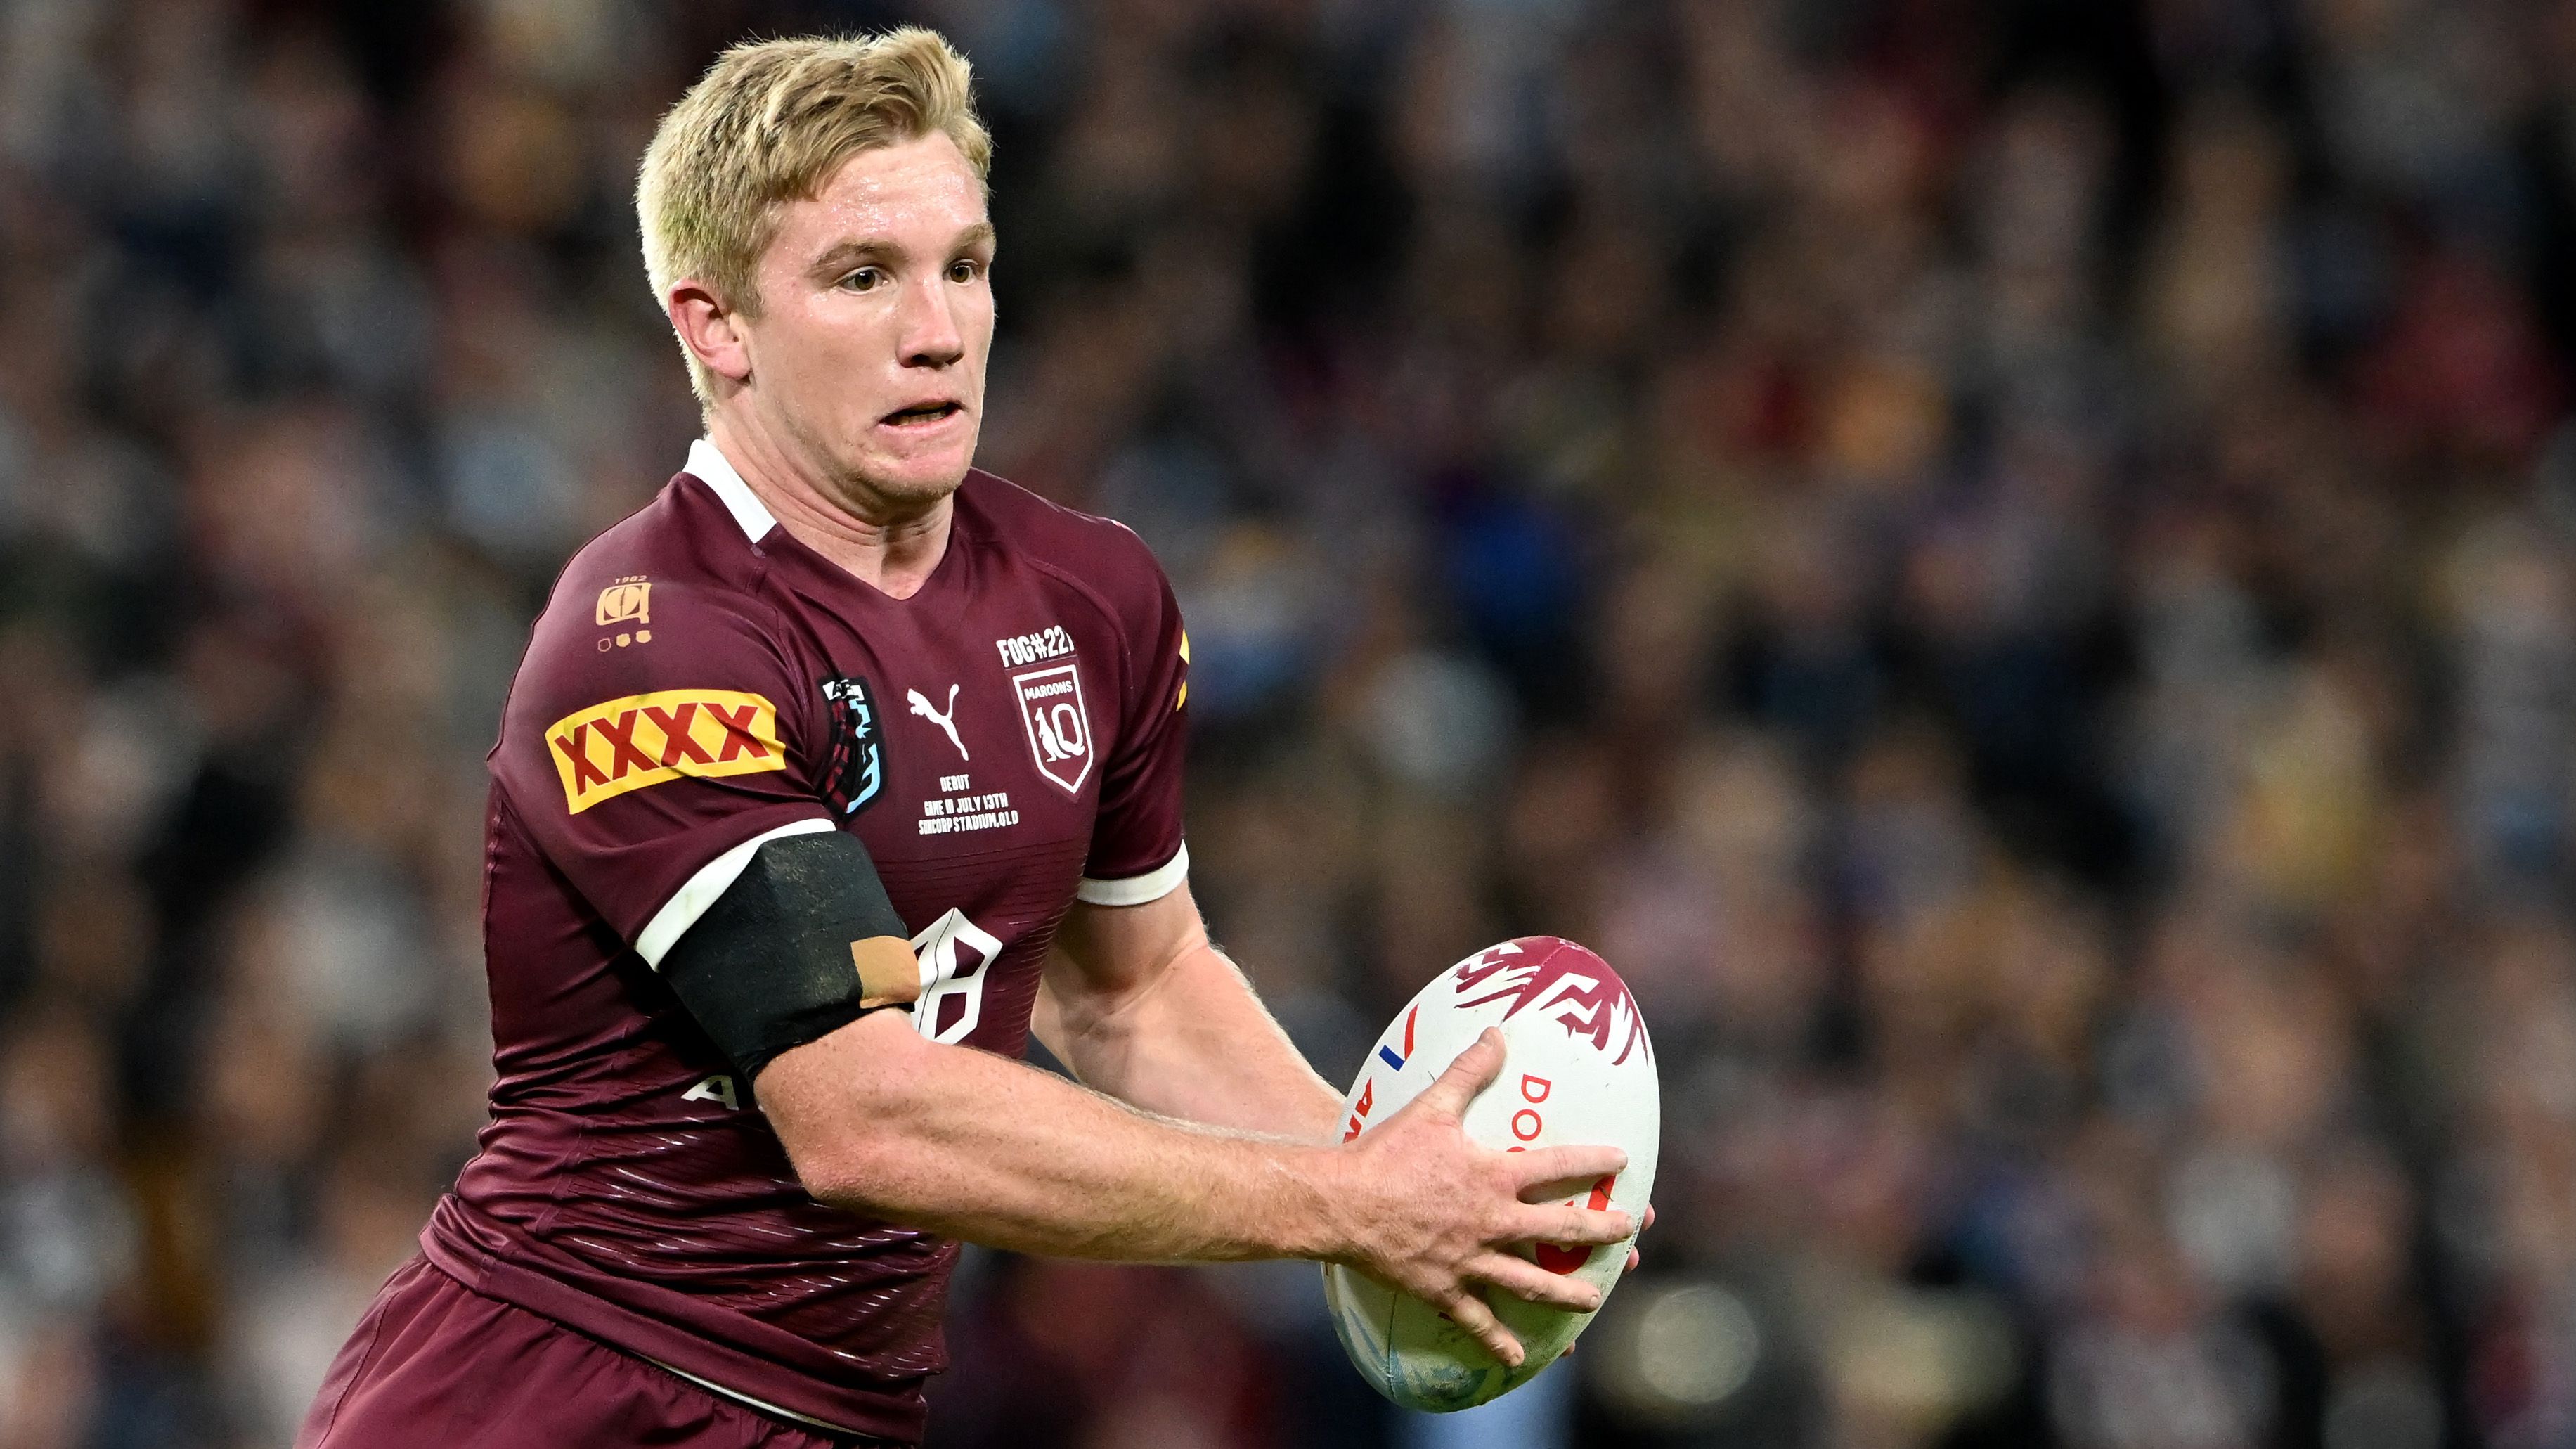 Queensland coach Billy Slater said he knew Maroons 'would be all right' after telling Tom Dearden he was playing